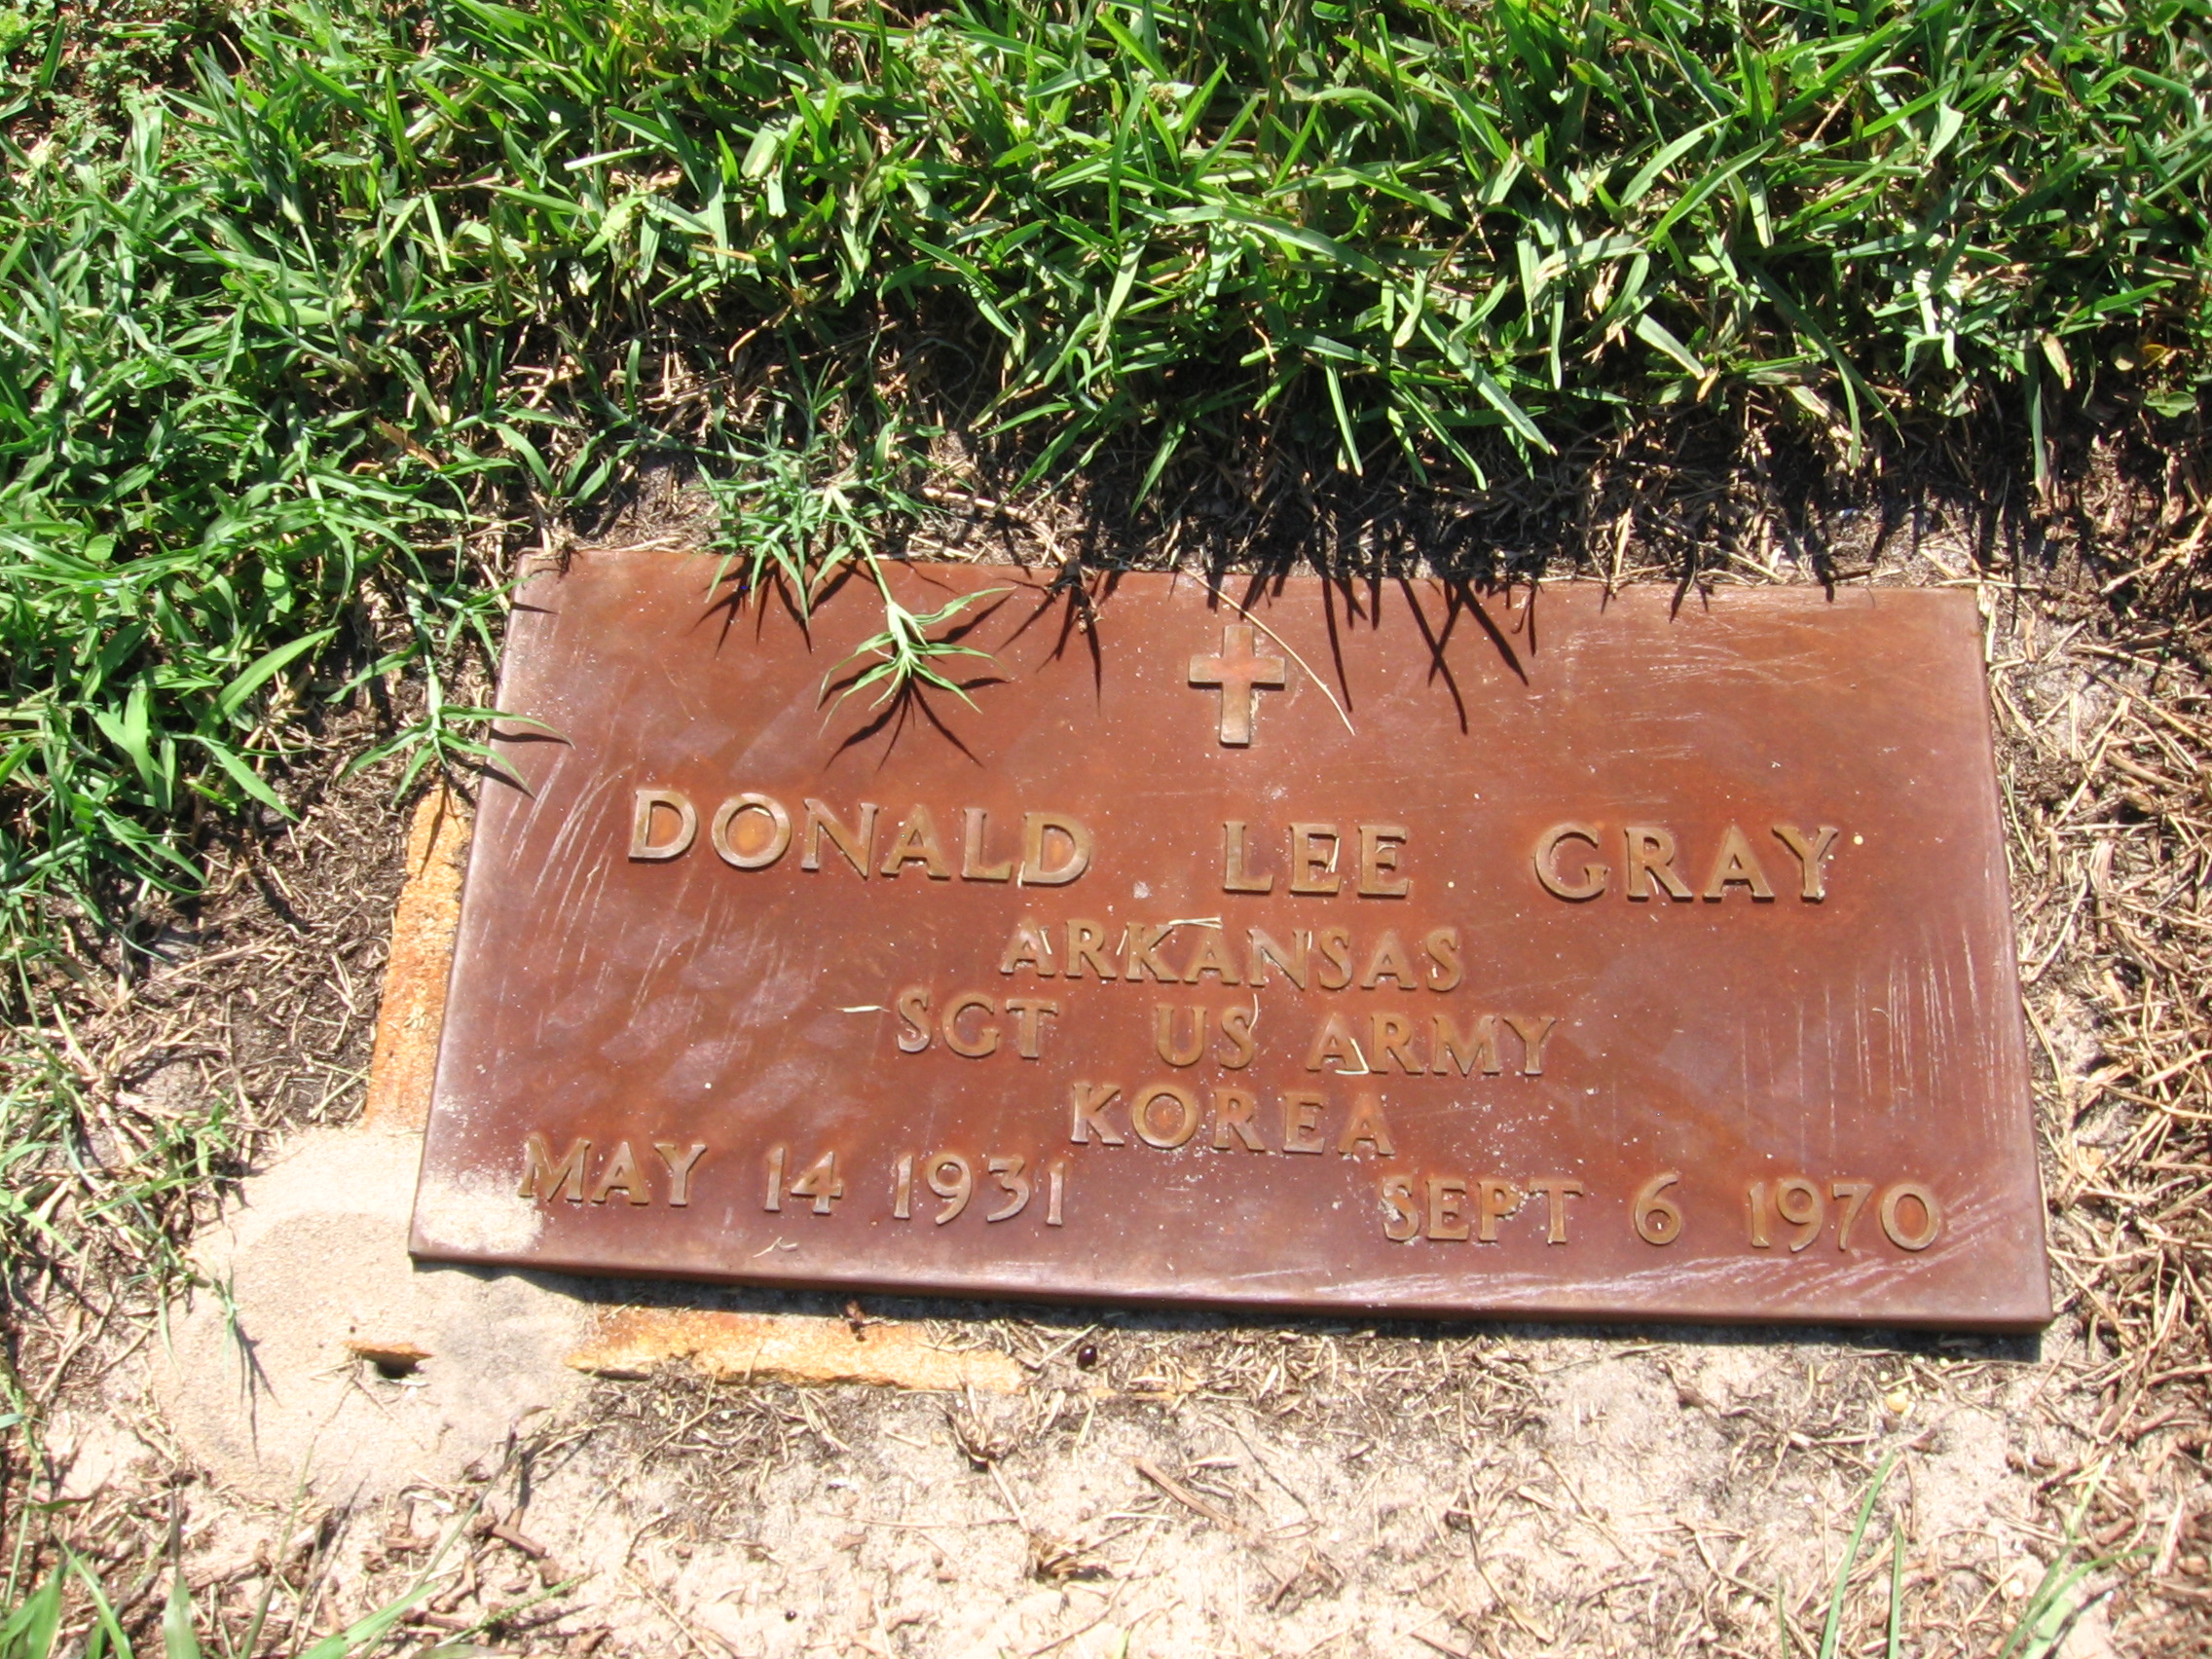 Sgt Donald Lee Gray